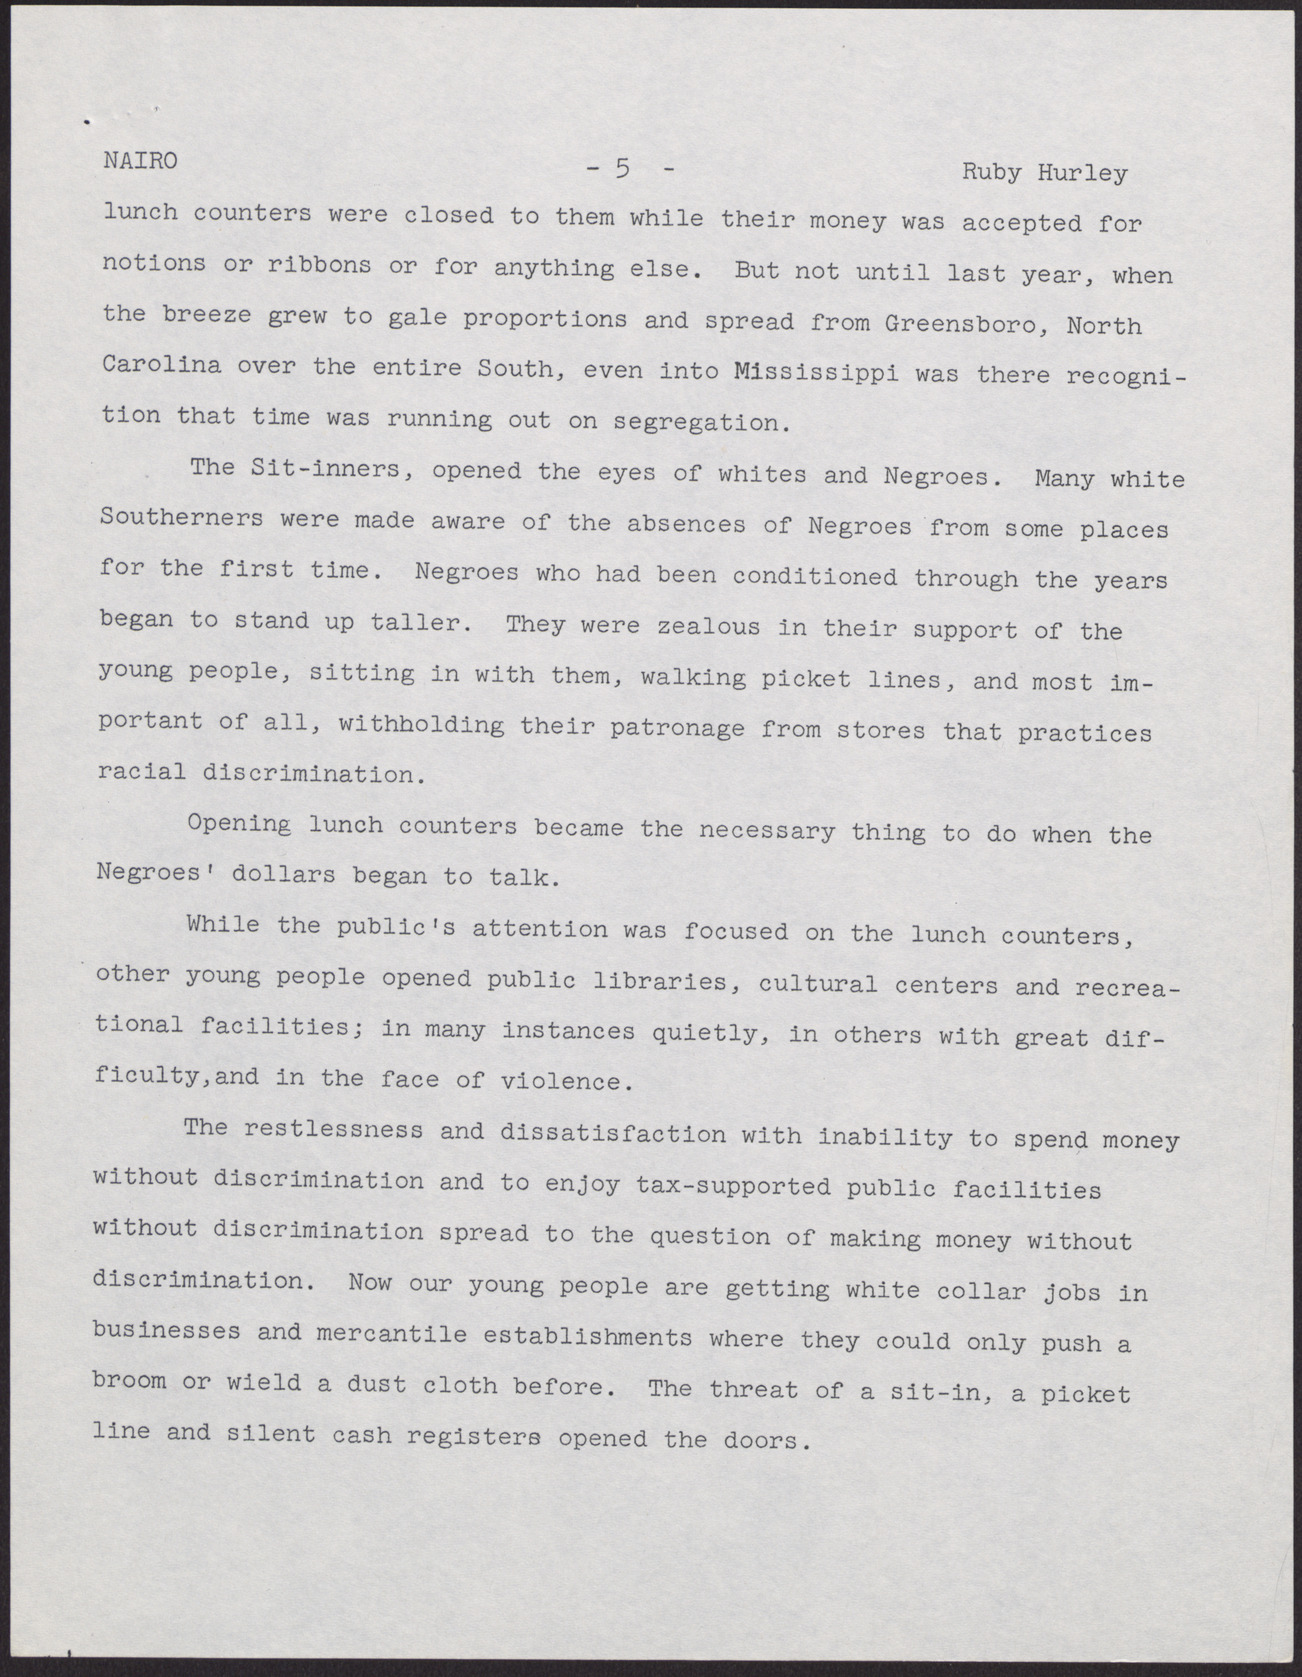 Paper for NAIRO Conference (7 pages), November 10, 1961, page 5